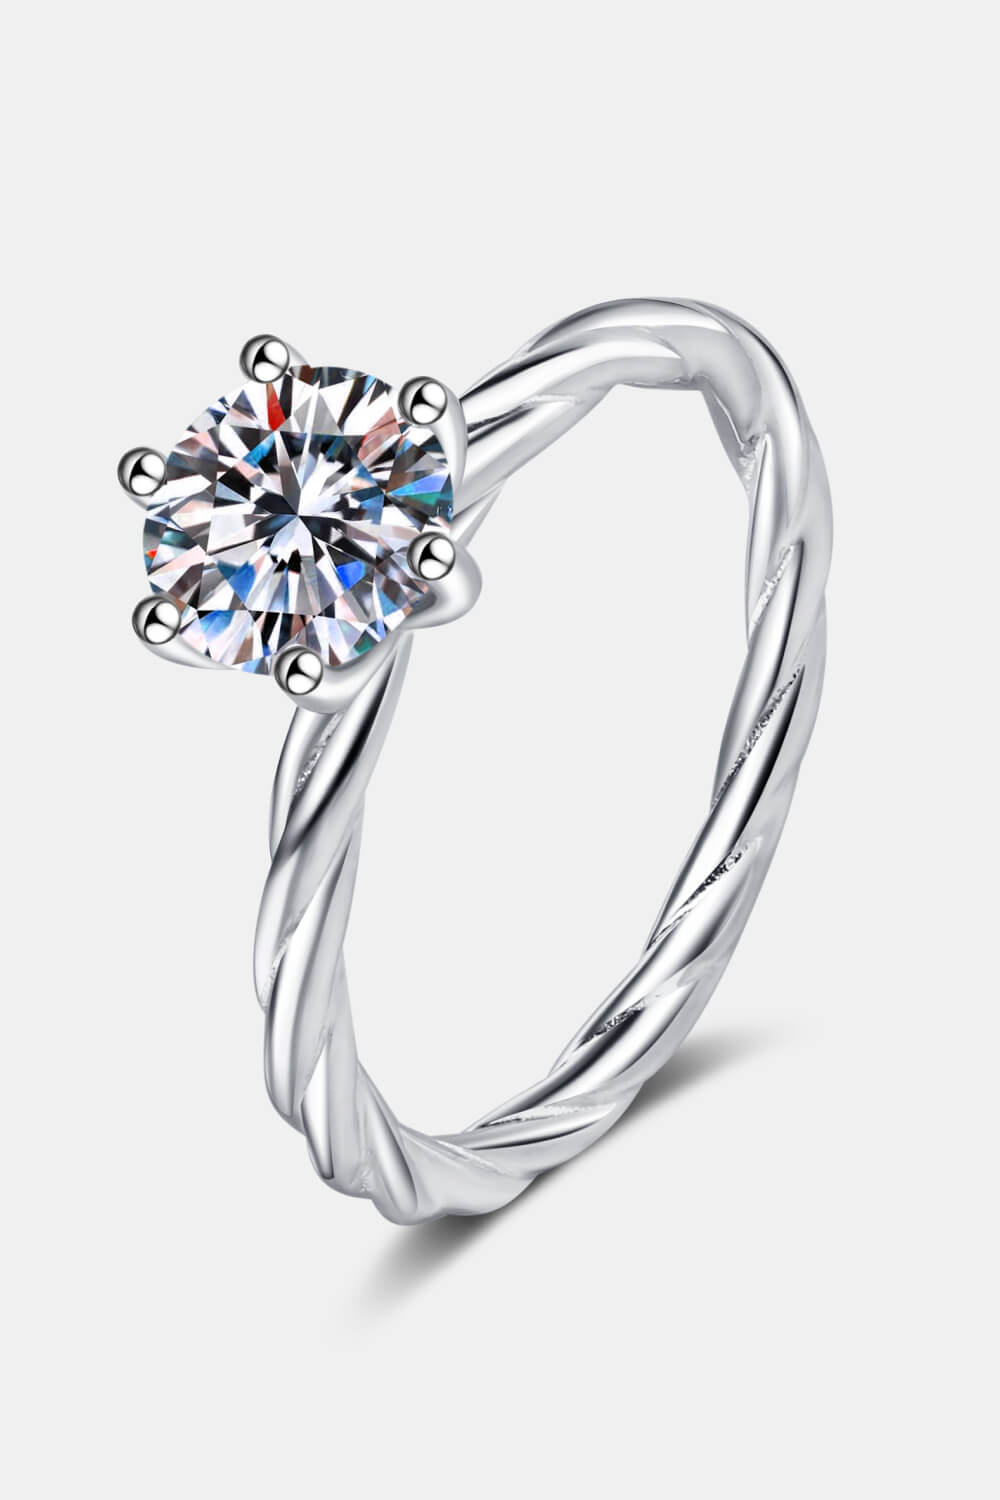 1 Carat Moissanite 6-Prong Twisted Ring BLUE ZONE PLANET